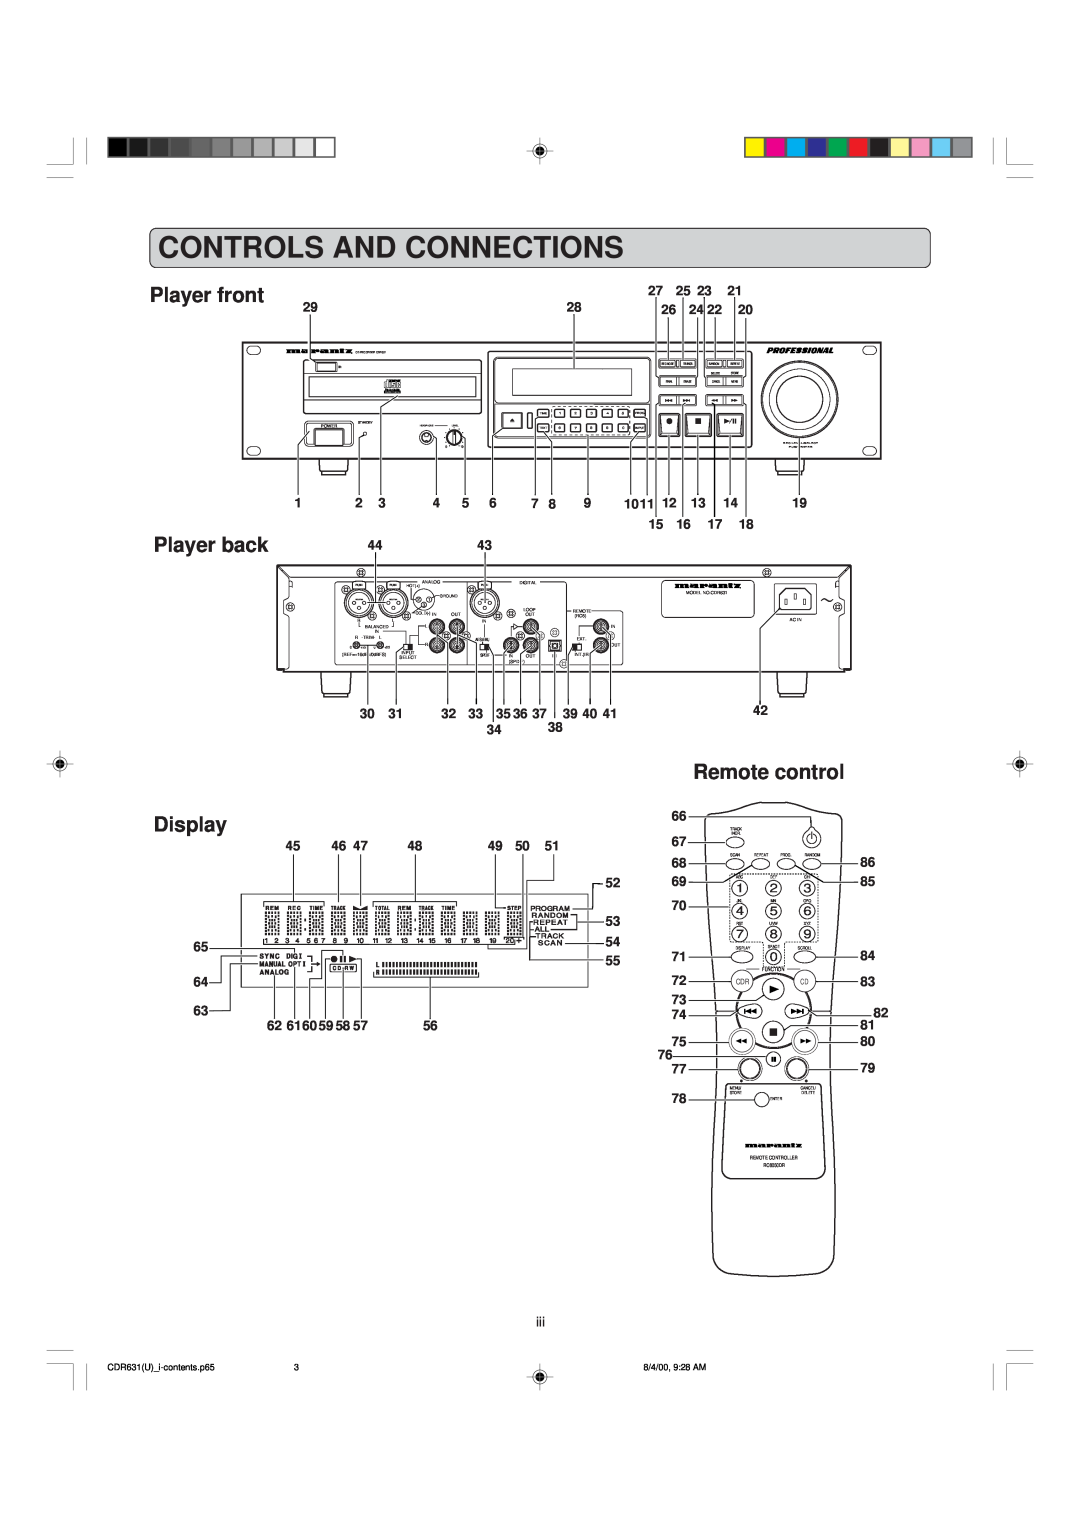 Marantz CDR631 manual Controls And Connections, Remote control, Player front, Player back, Display 